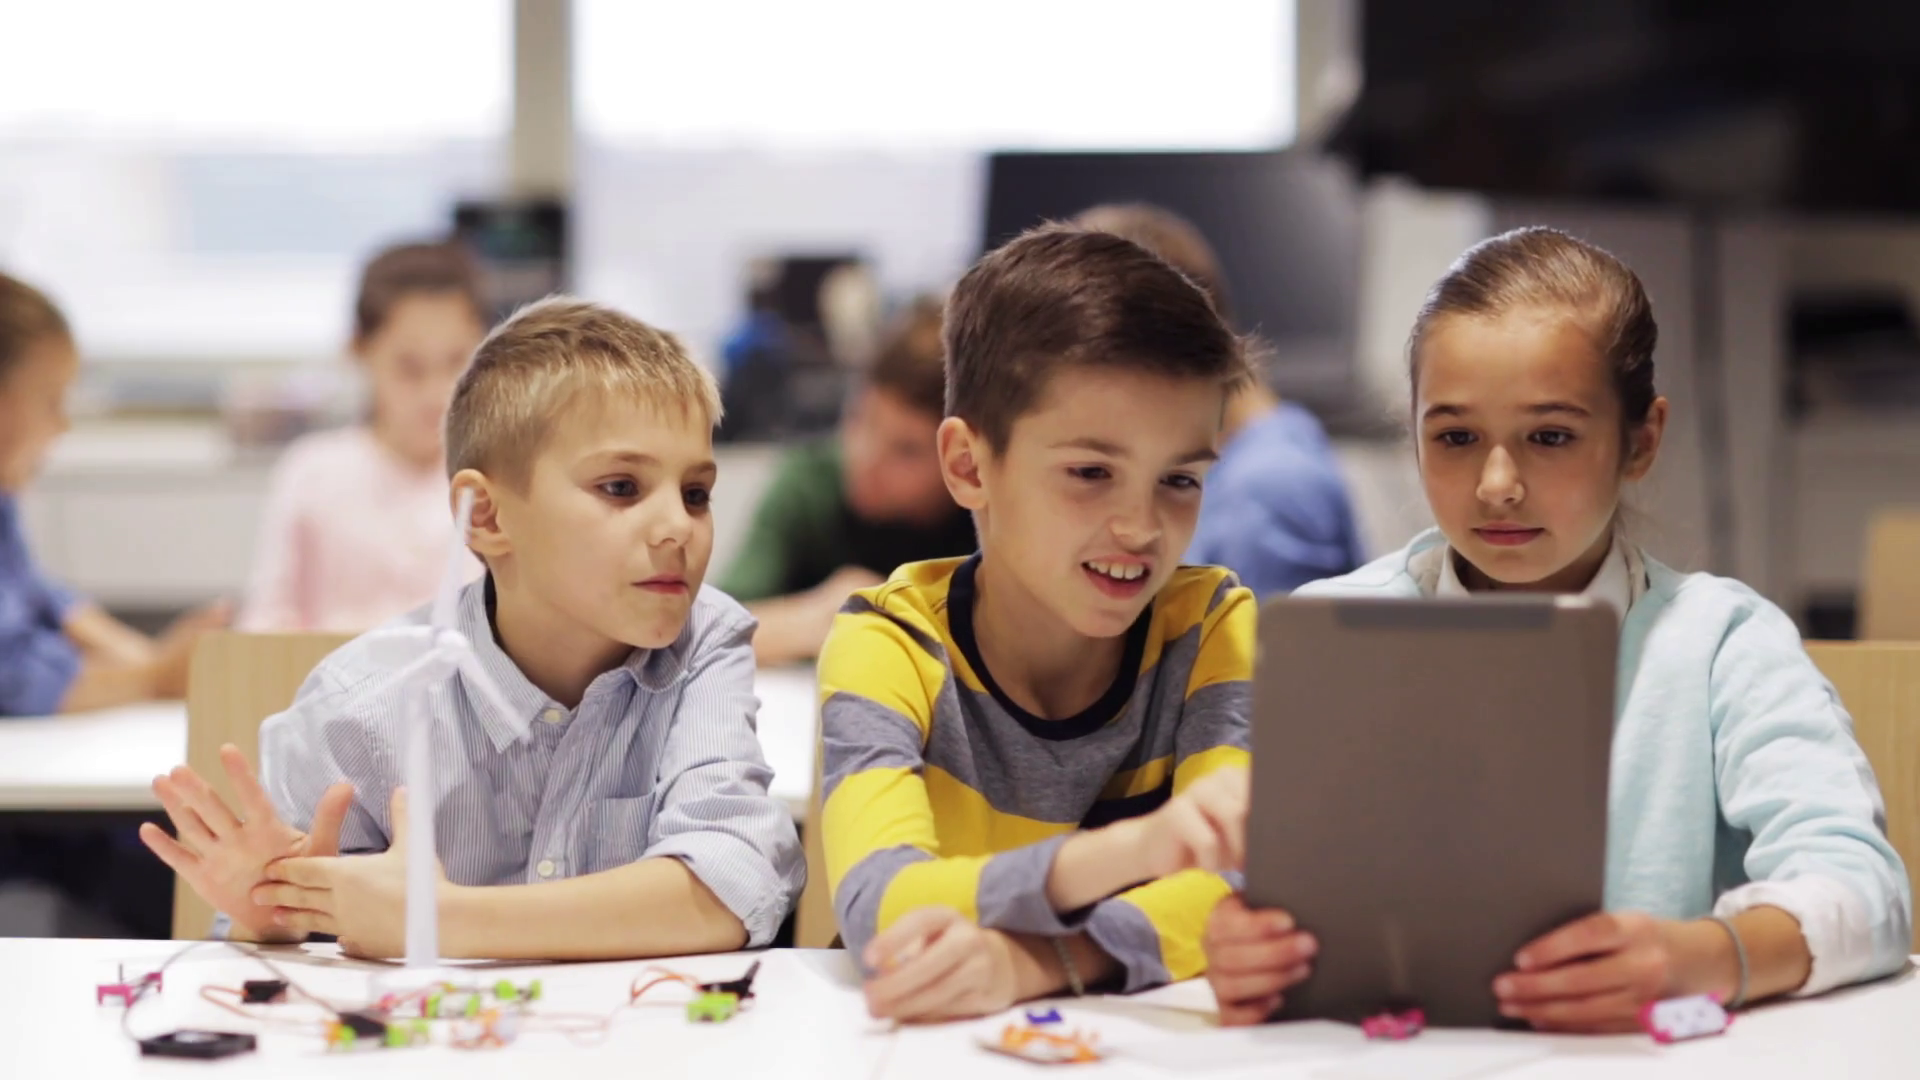 education-science-technology-children-and-people-concept-group-of-smiling-kids-or-students-with-tablet-pc-computer-programming-electric-windmill-toy-at-robotics-school-lesson_ru6hd2s7e_thumbnail-full01.png